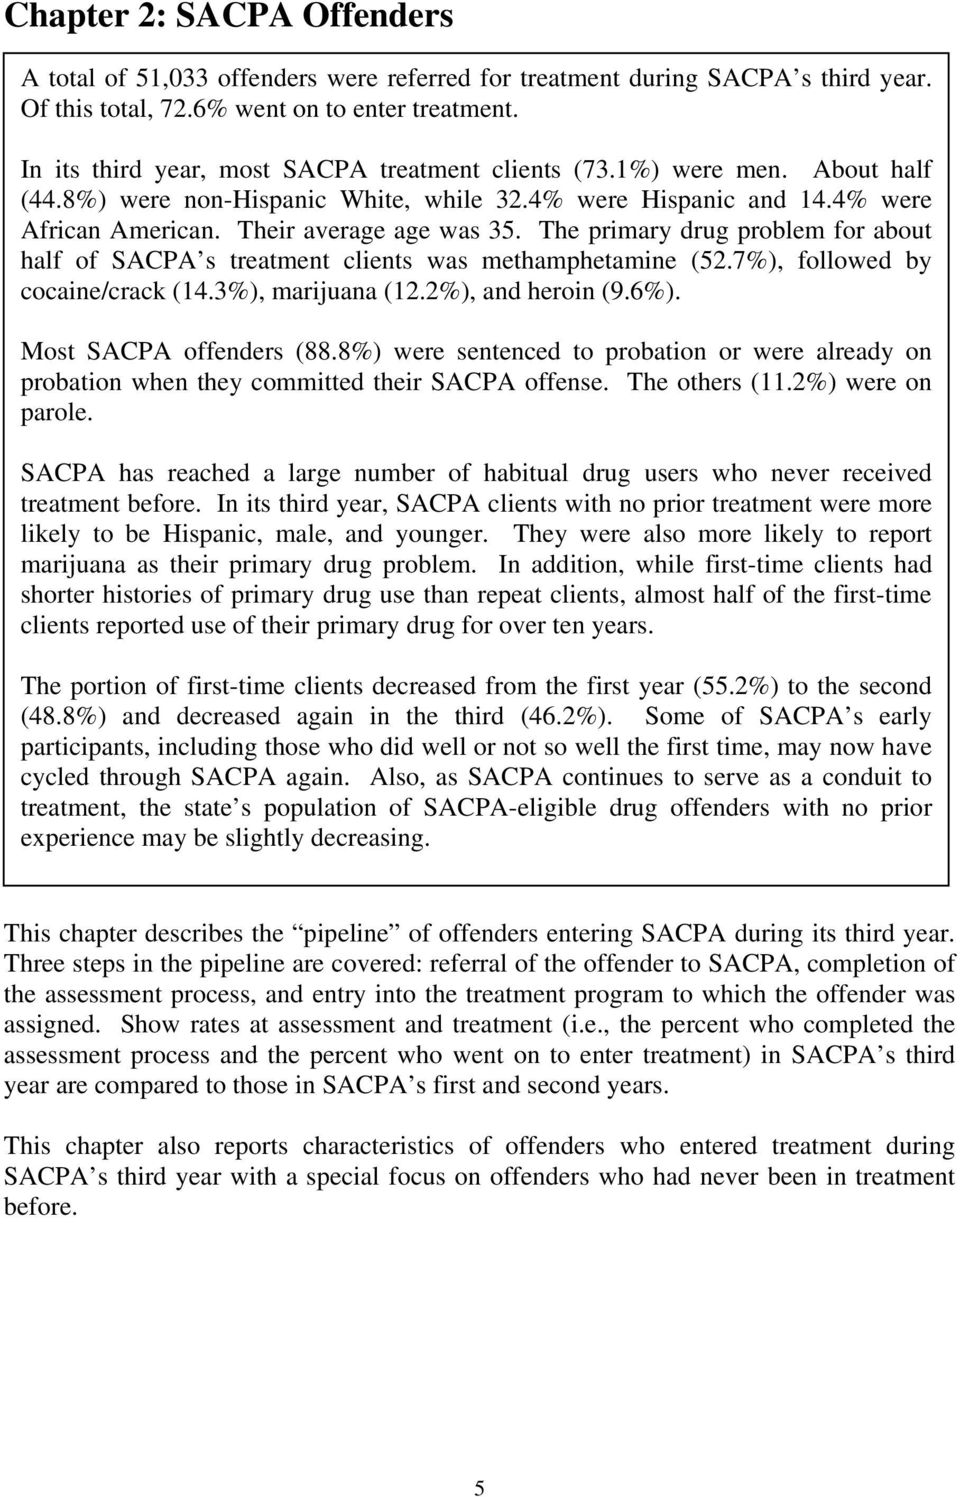 The primary drug problem for about half of SACPA s treatment clients was methamphetamine (52.7%), followed by cocaine/crack (14.3%), marijuana (12.2%), and heroin (9.6%). Most SACPA offenders (88.